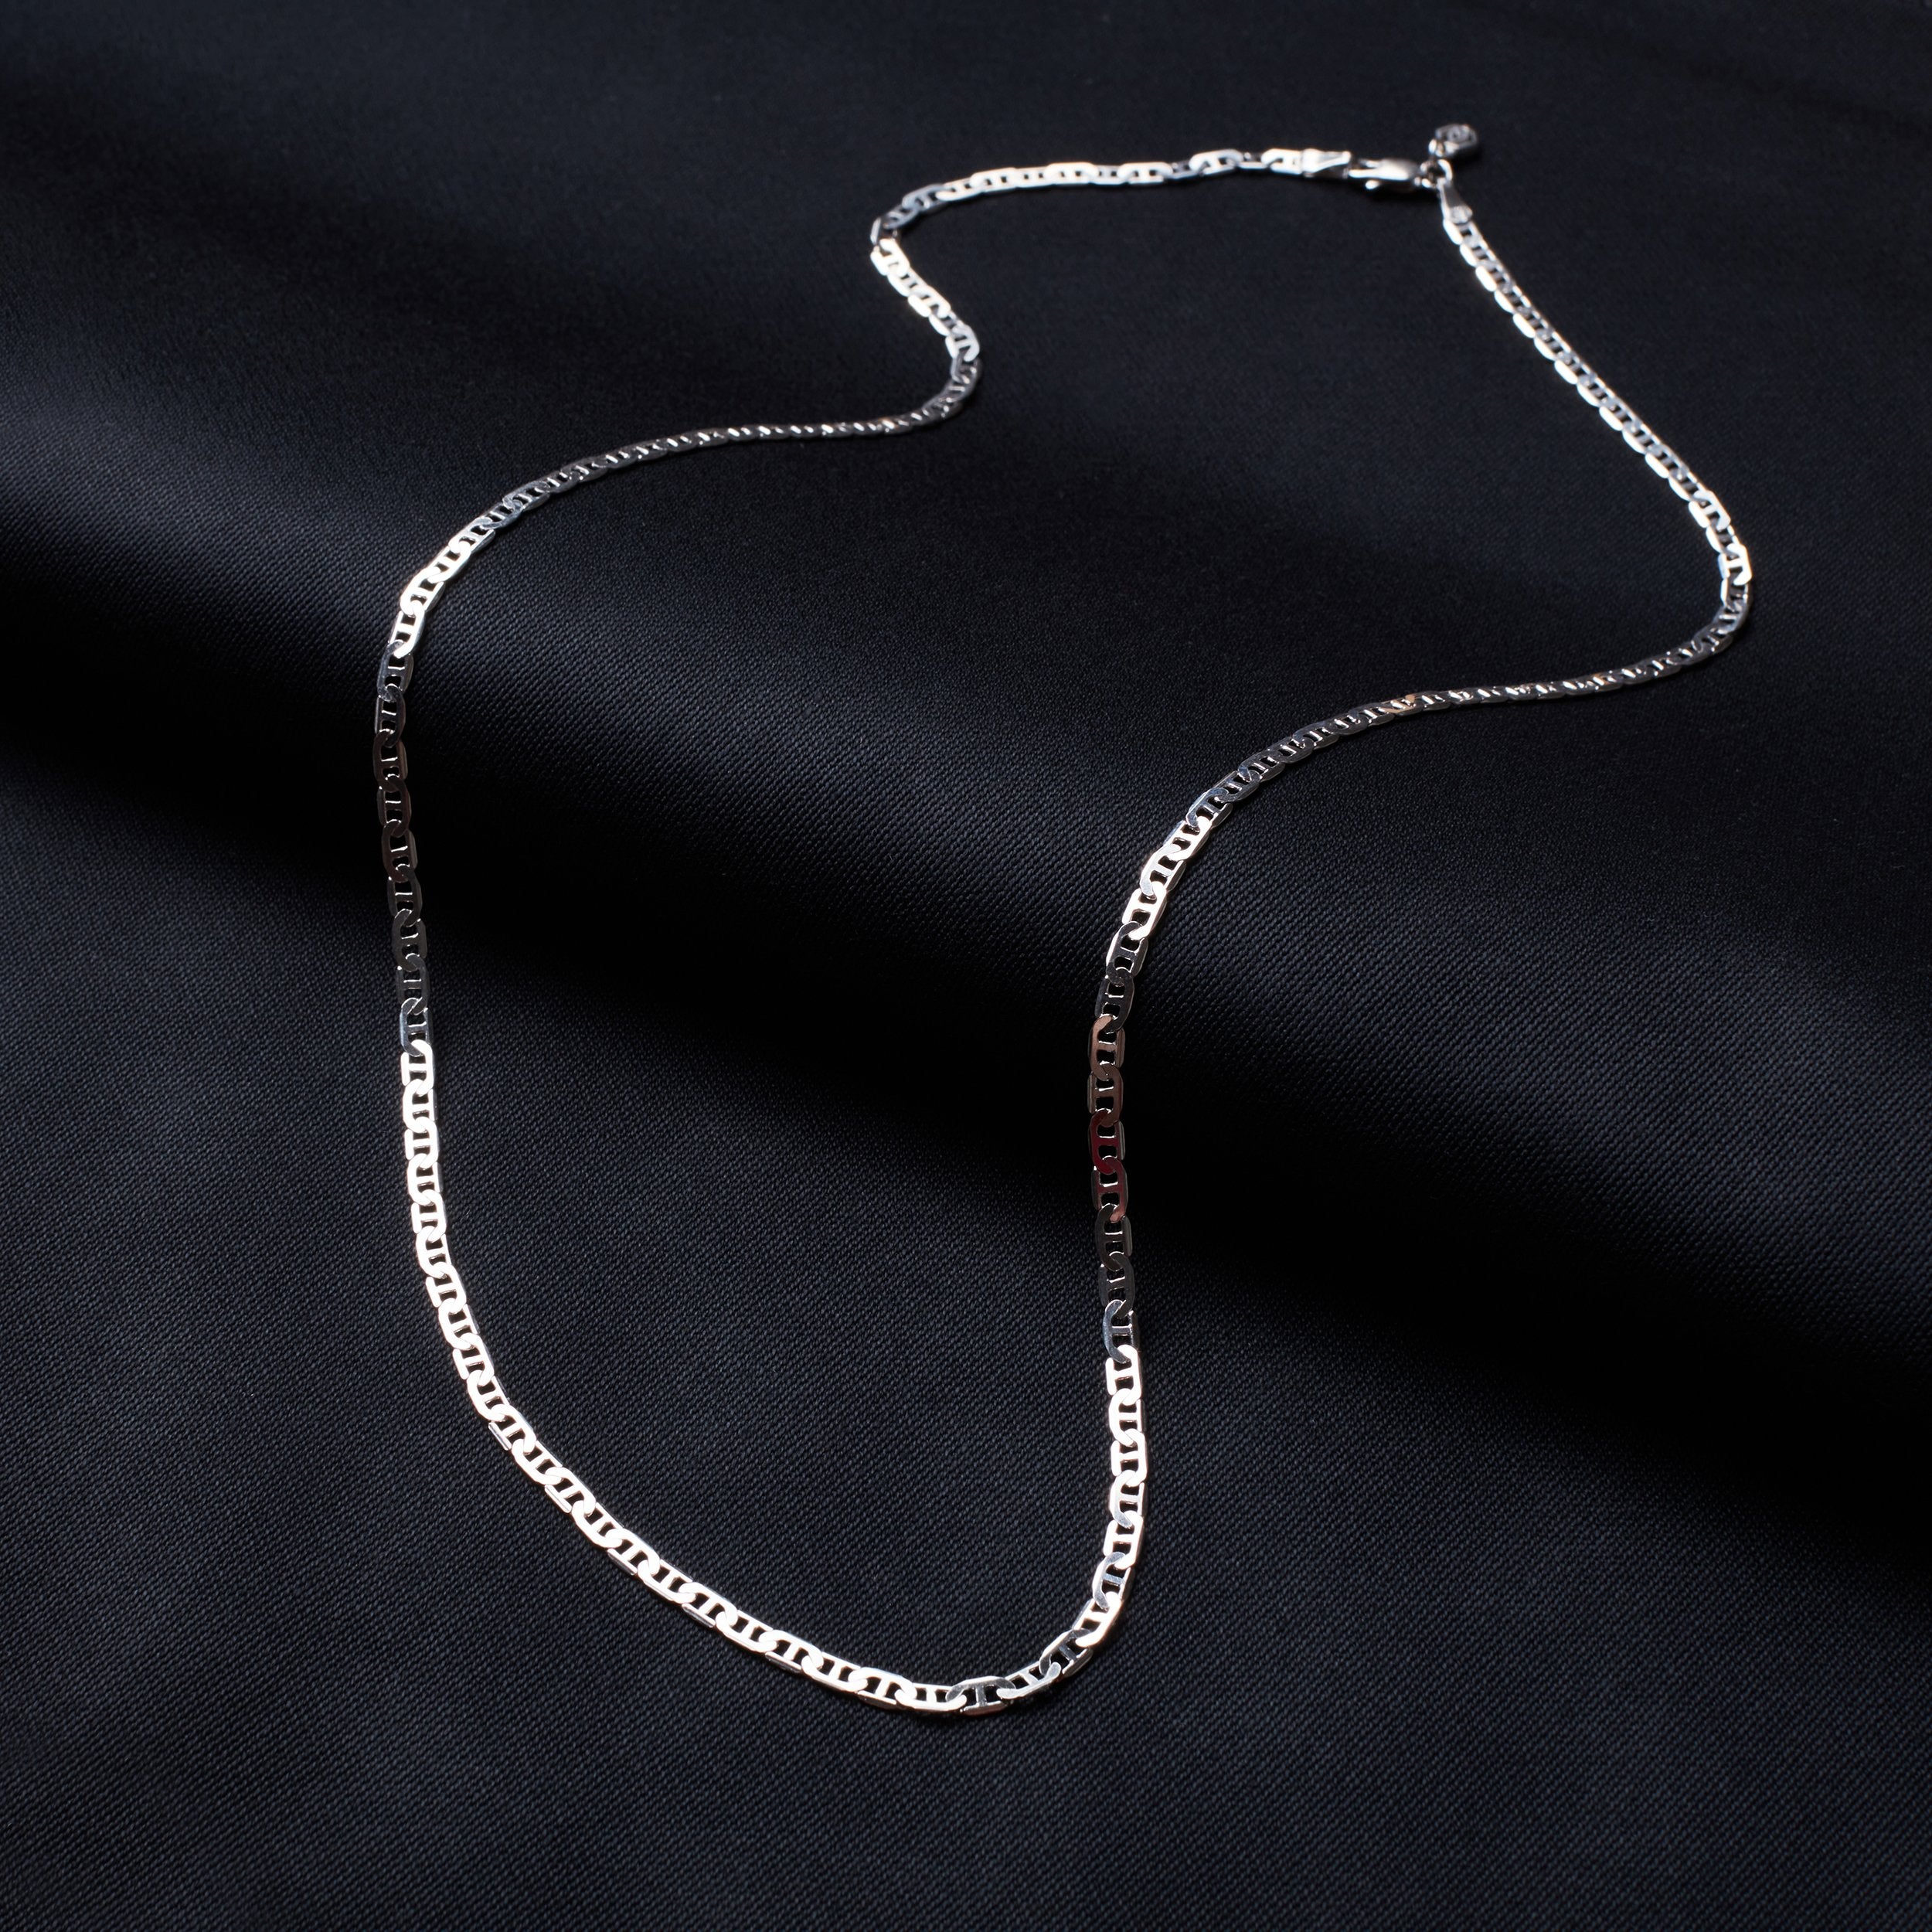 Bar Chain Sterling Silver Necklace for Men